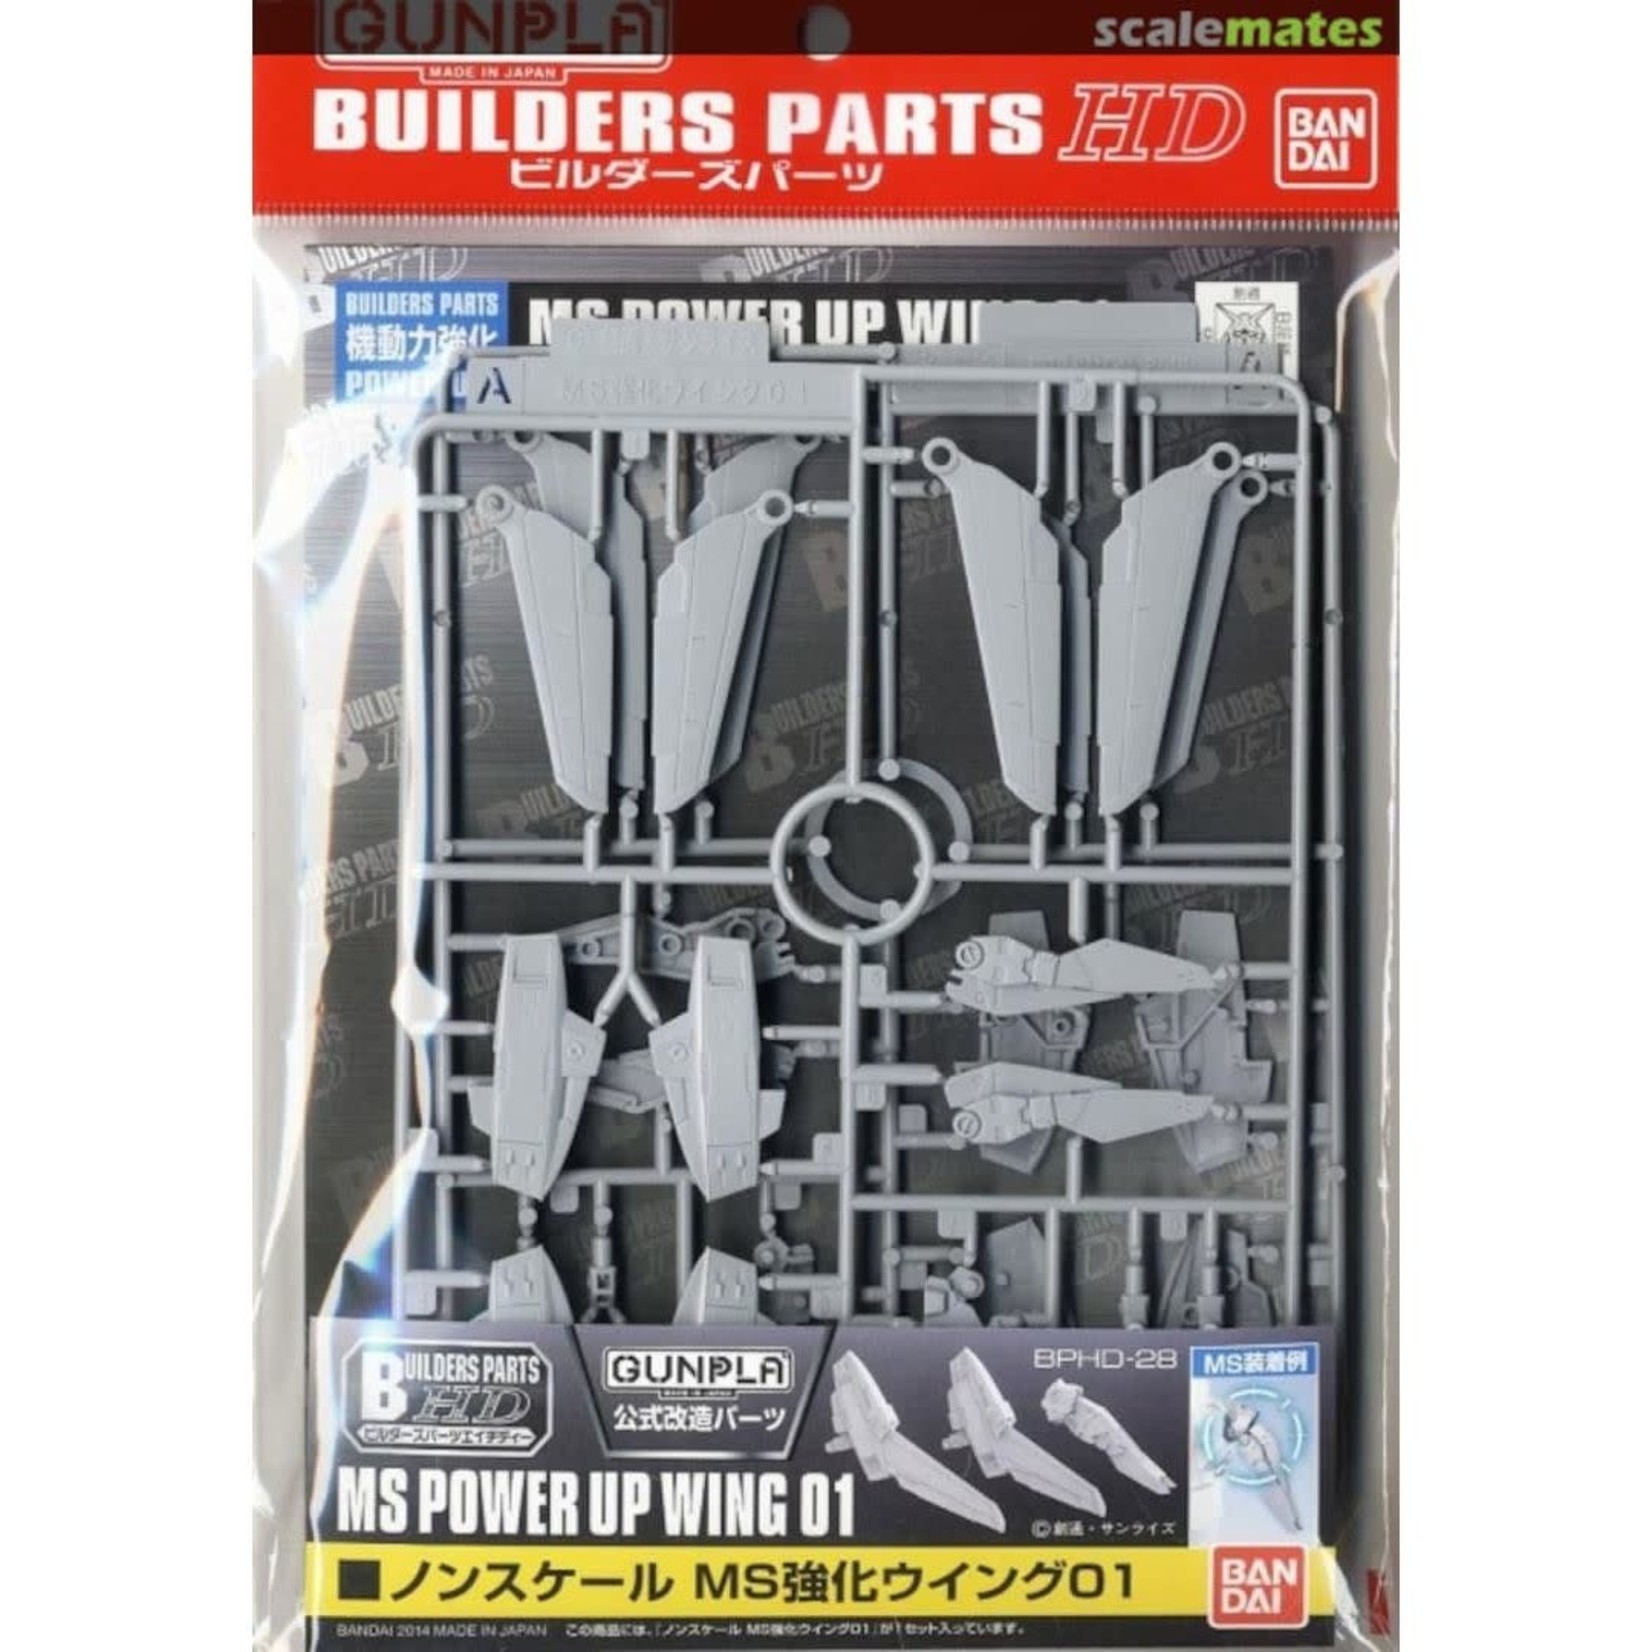 BANDAI BUILDERS PARTS - HD MS POWER UP WING 01